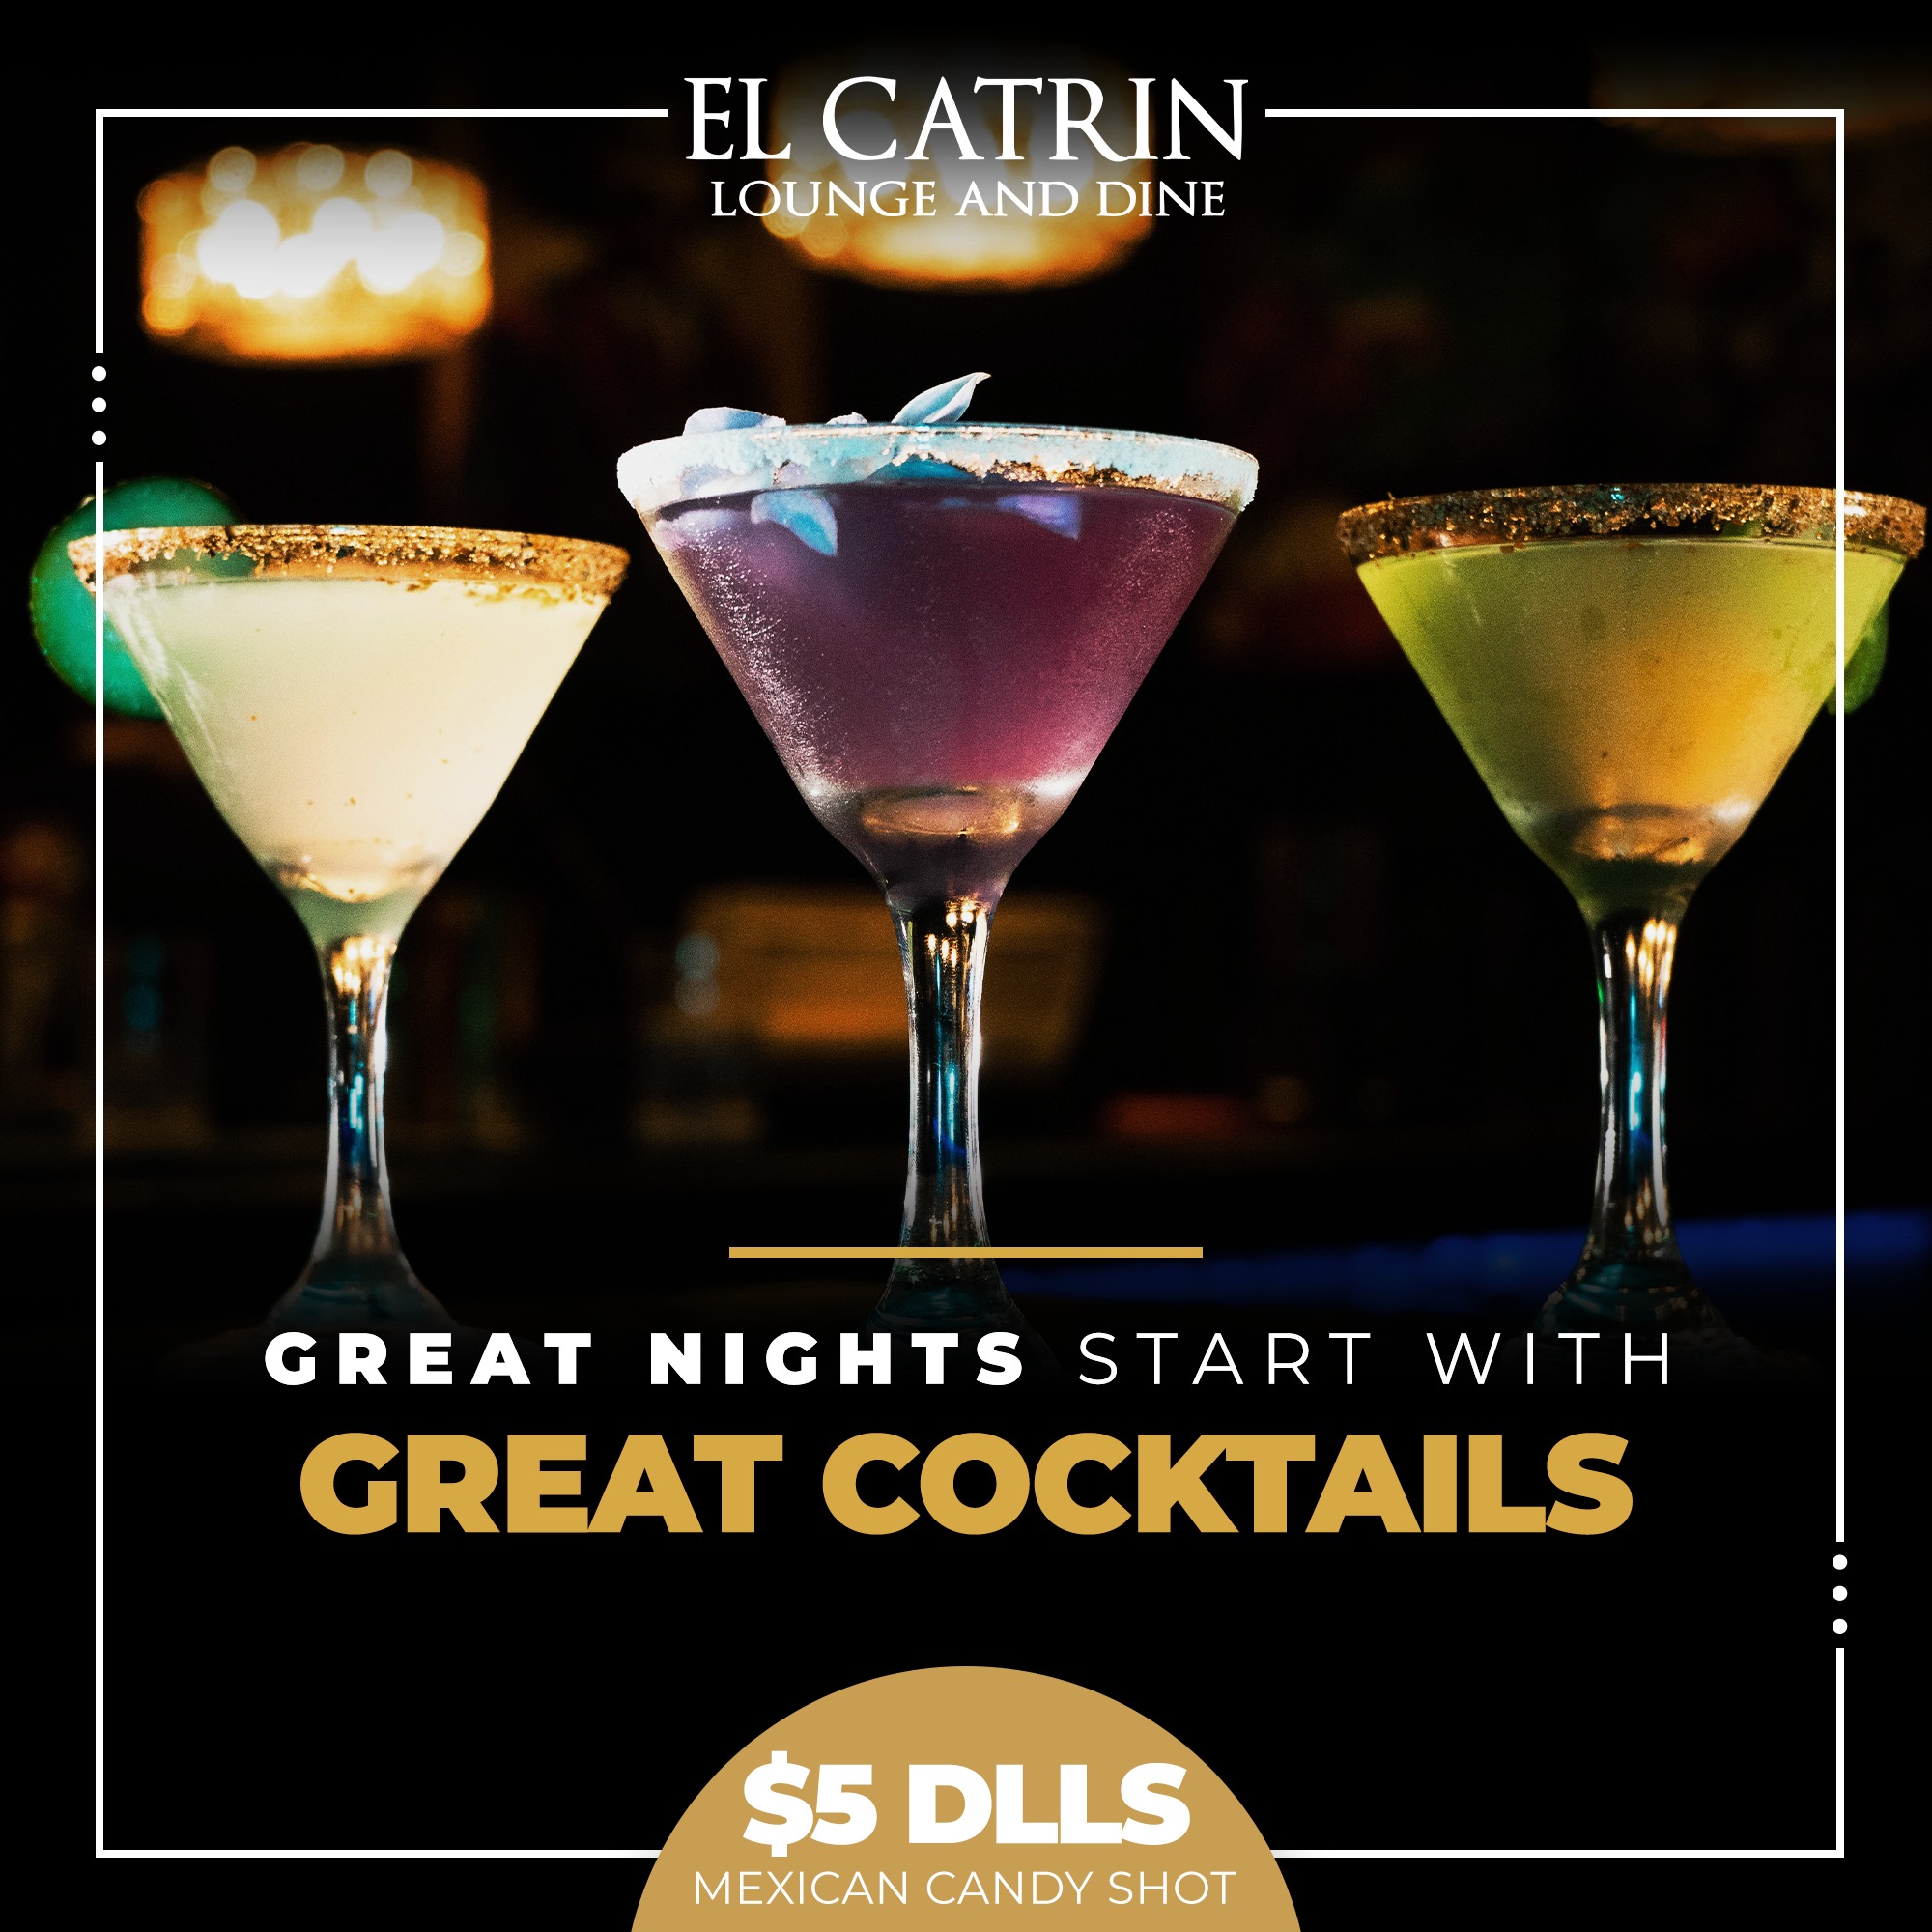 El Catrin Lounge and Dine